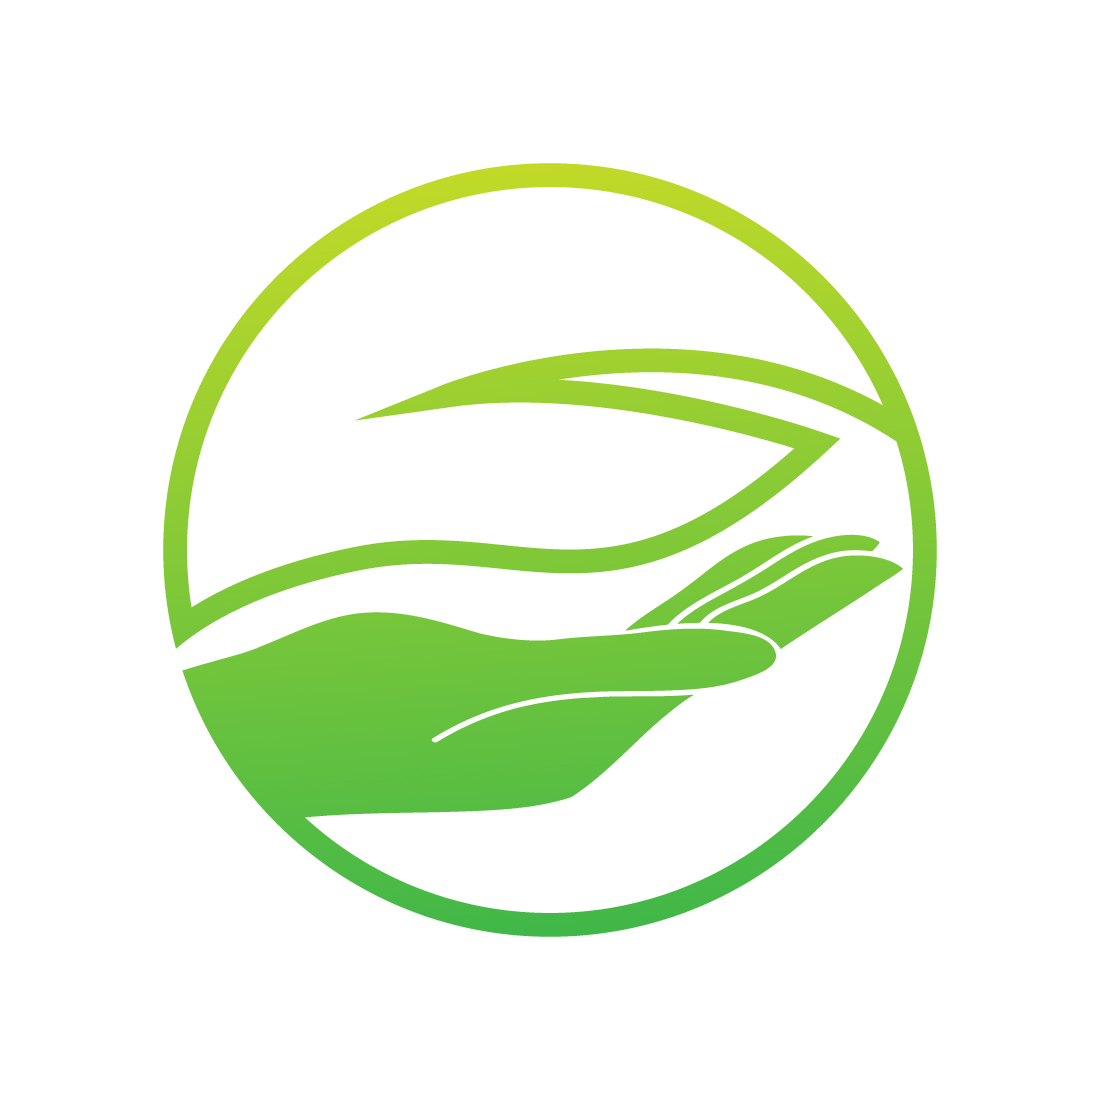 Fresh Hand and Leaf logo for health cover image.